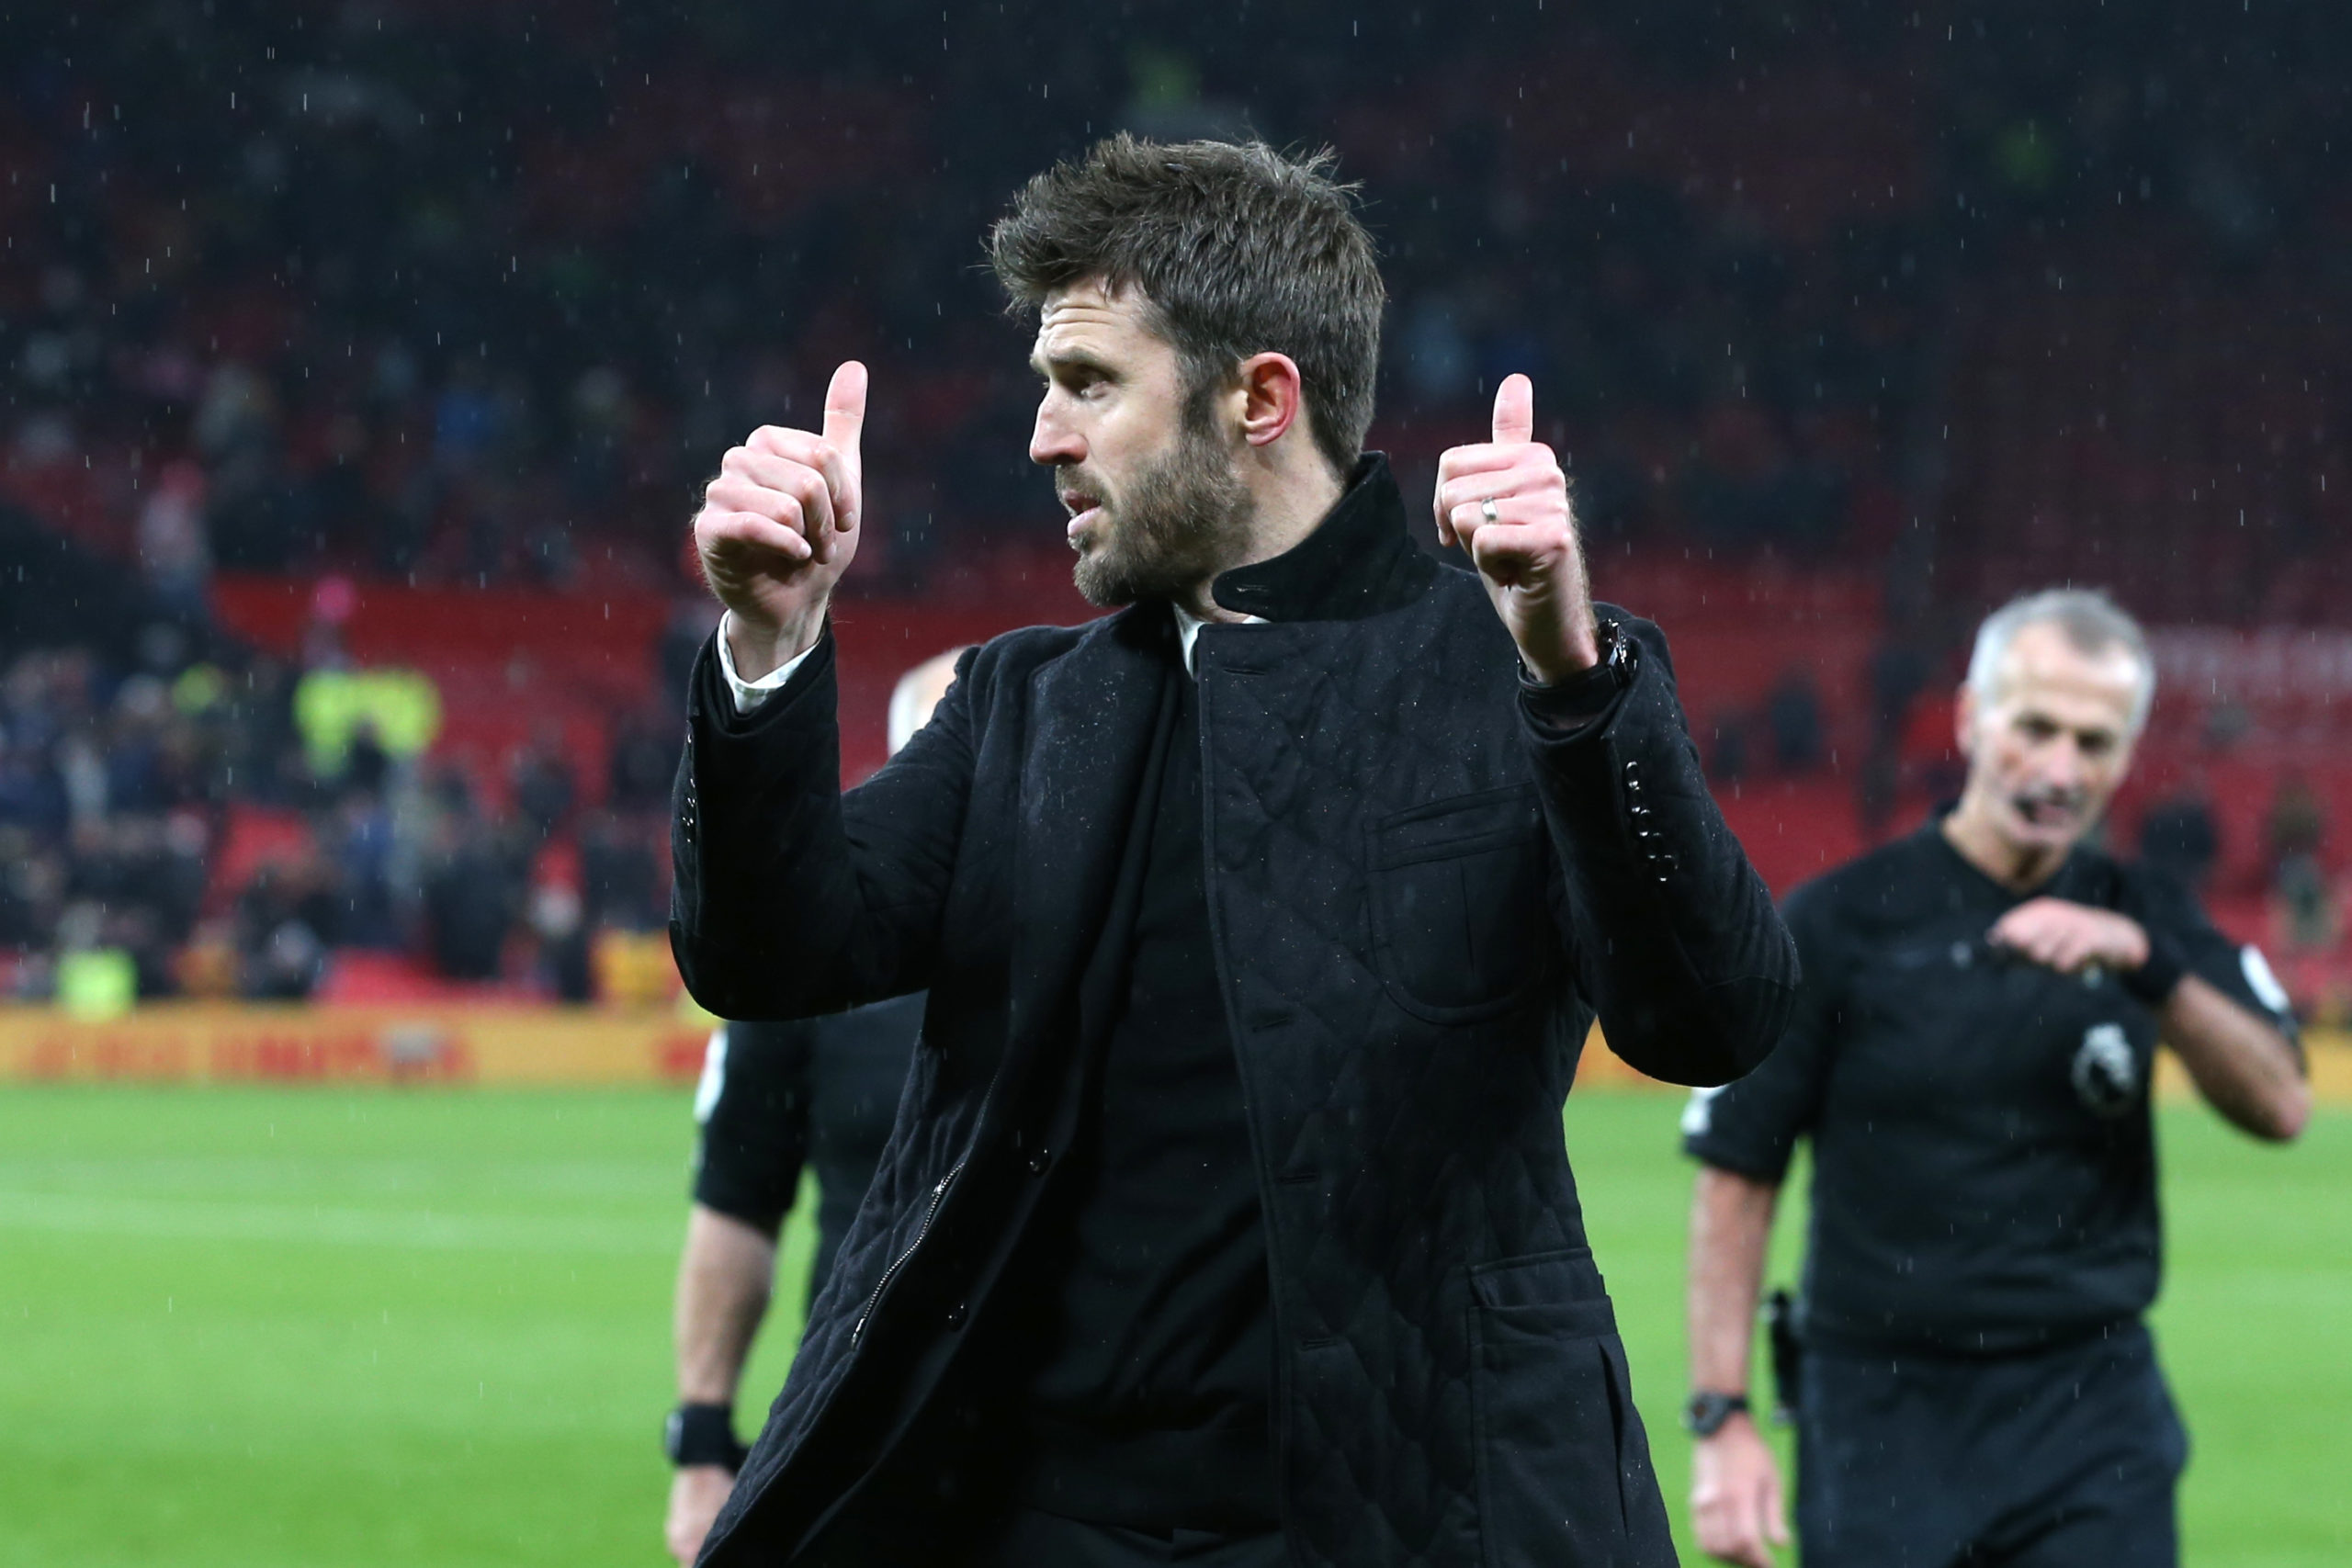 United stars react to Carrick's departure after Arsenal win